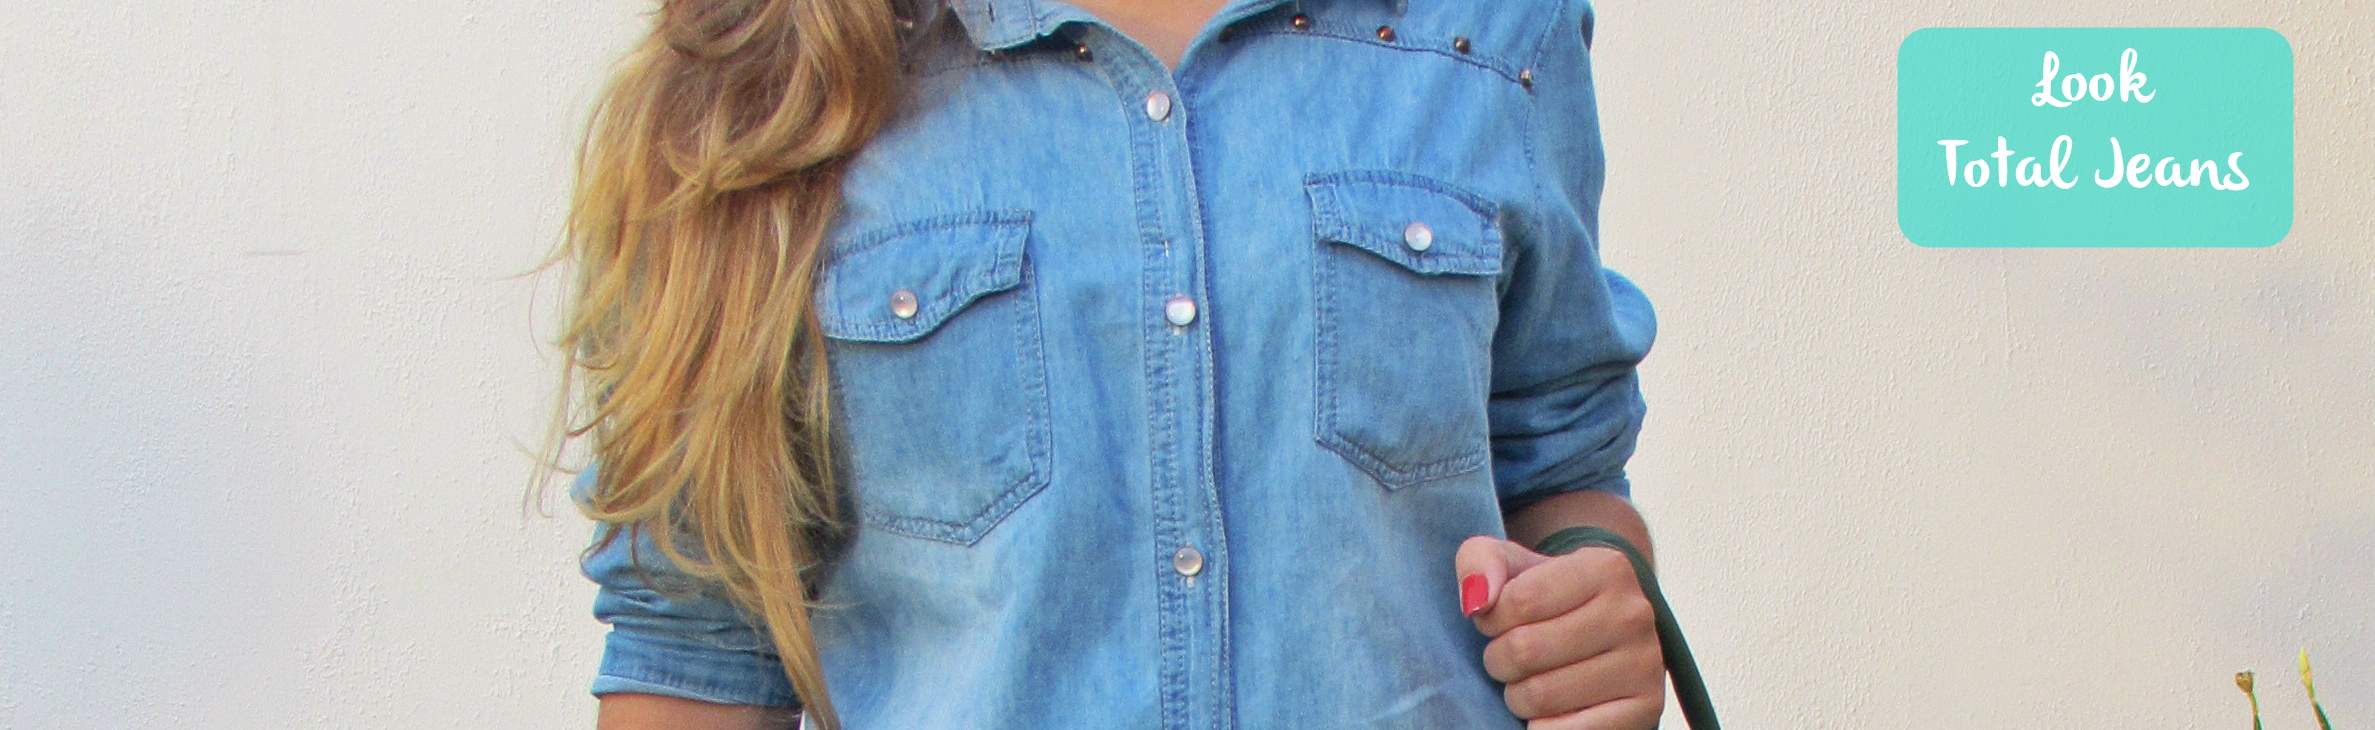 Look da lary: Total Jeans